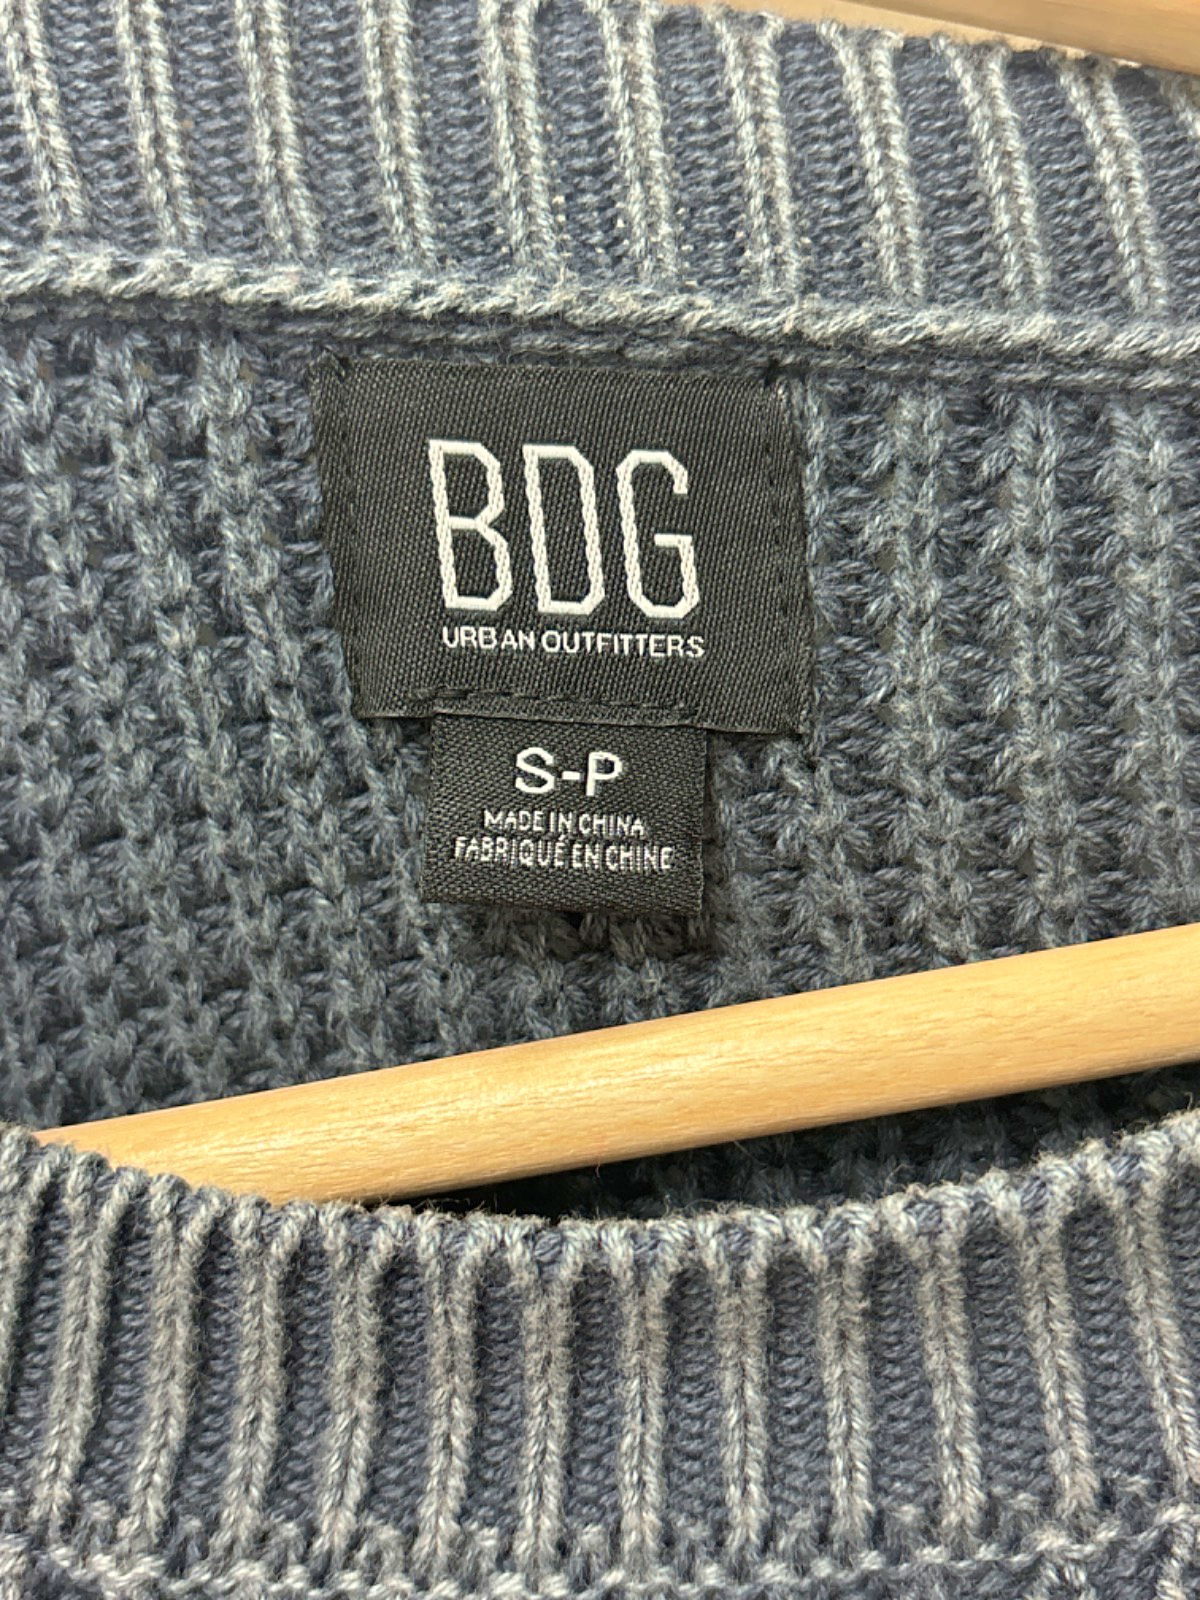 BDG Jeans Grey Sweater S